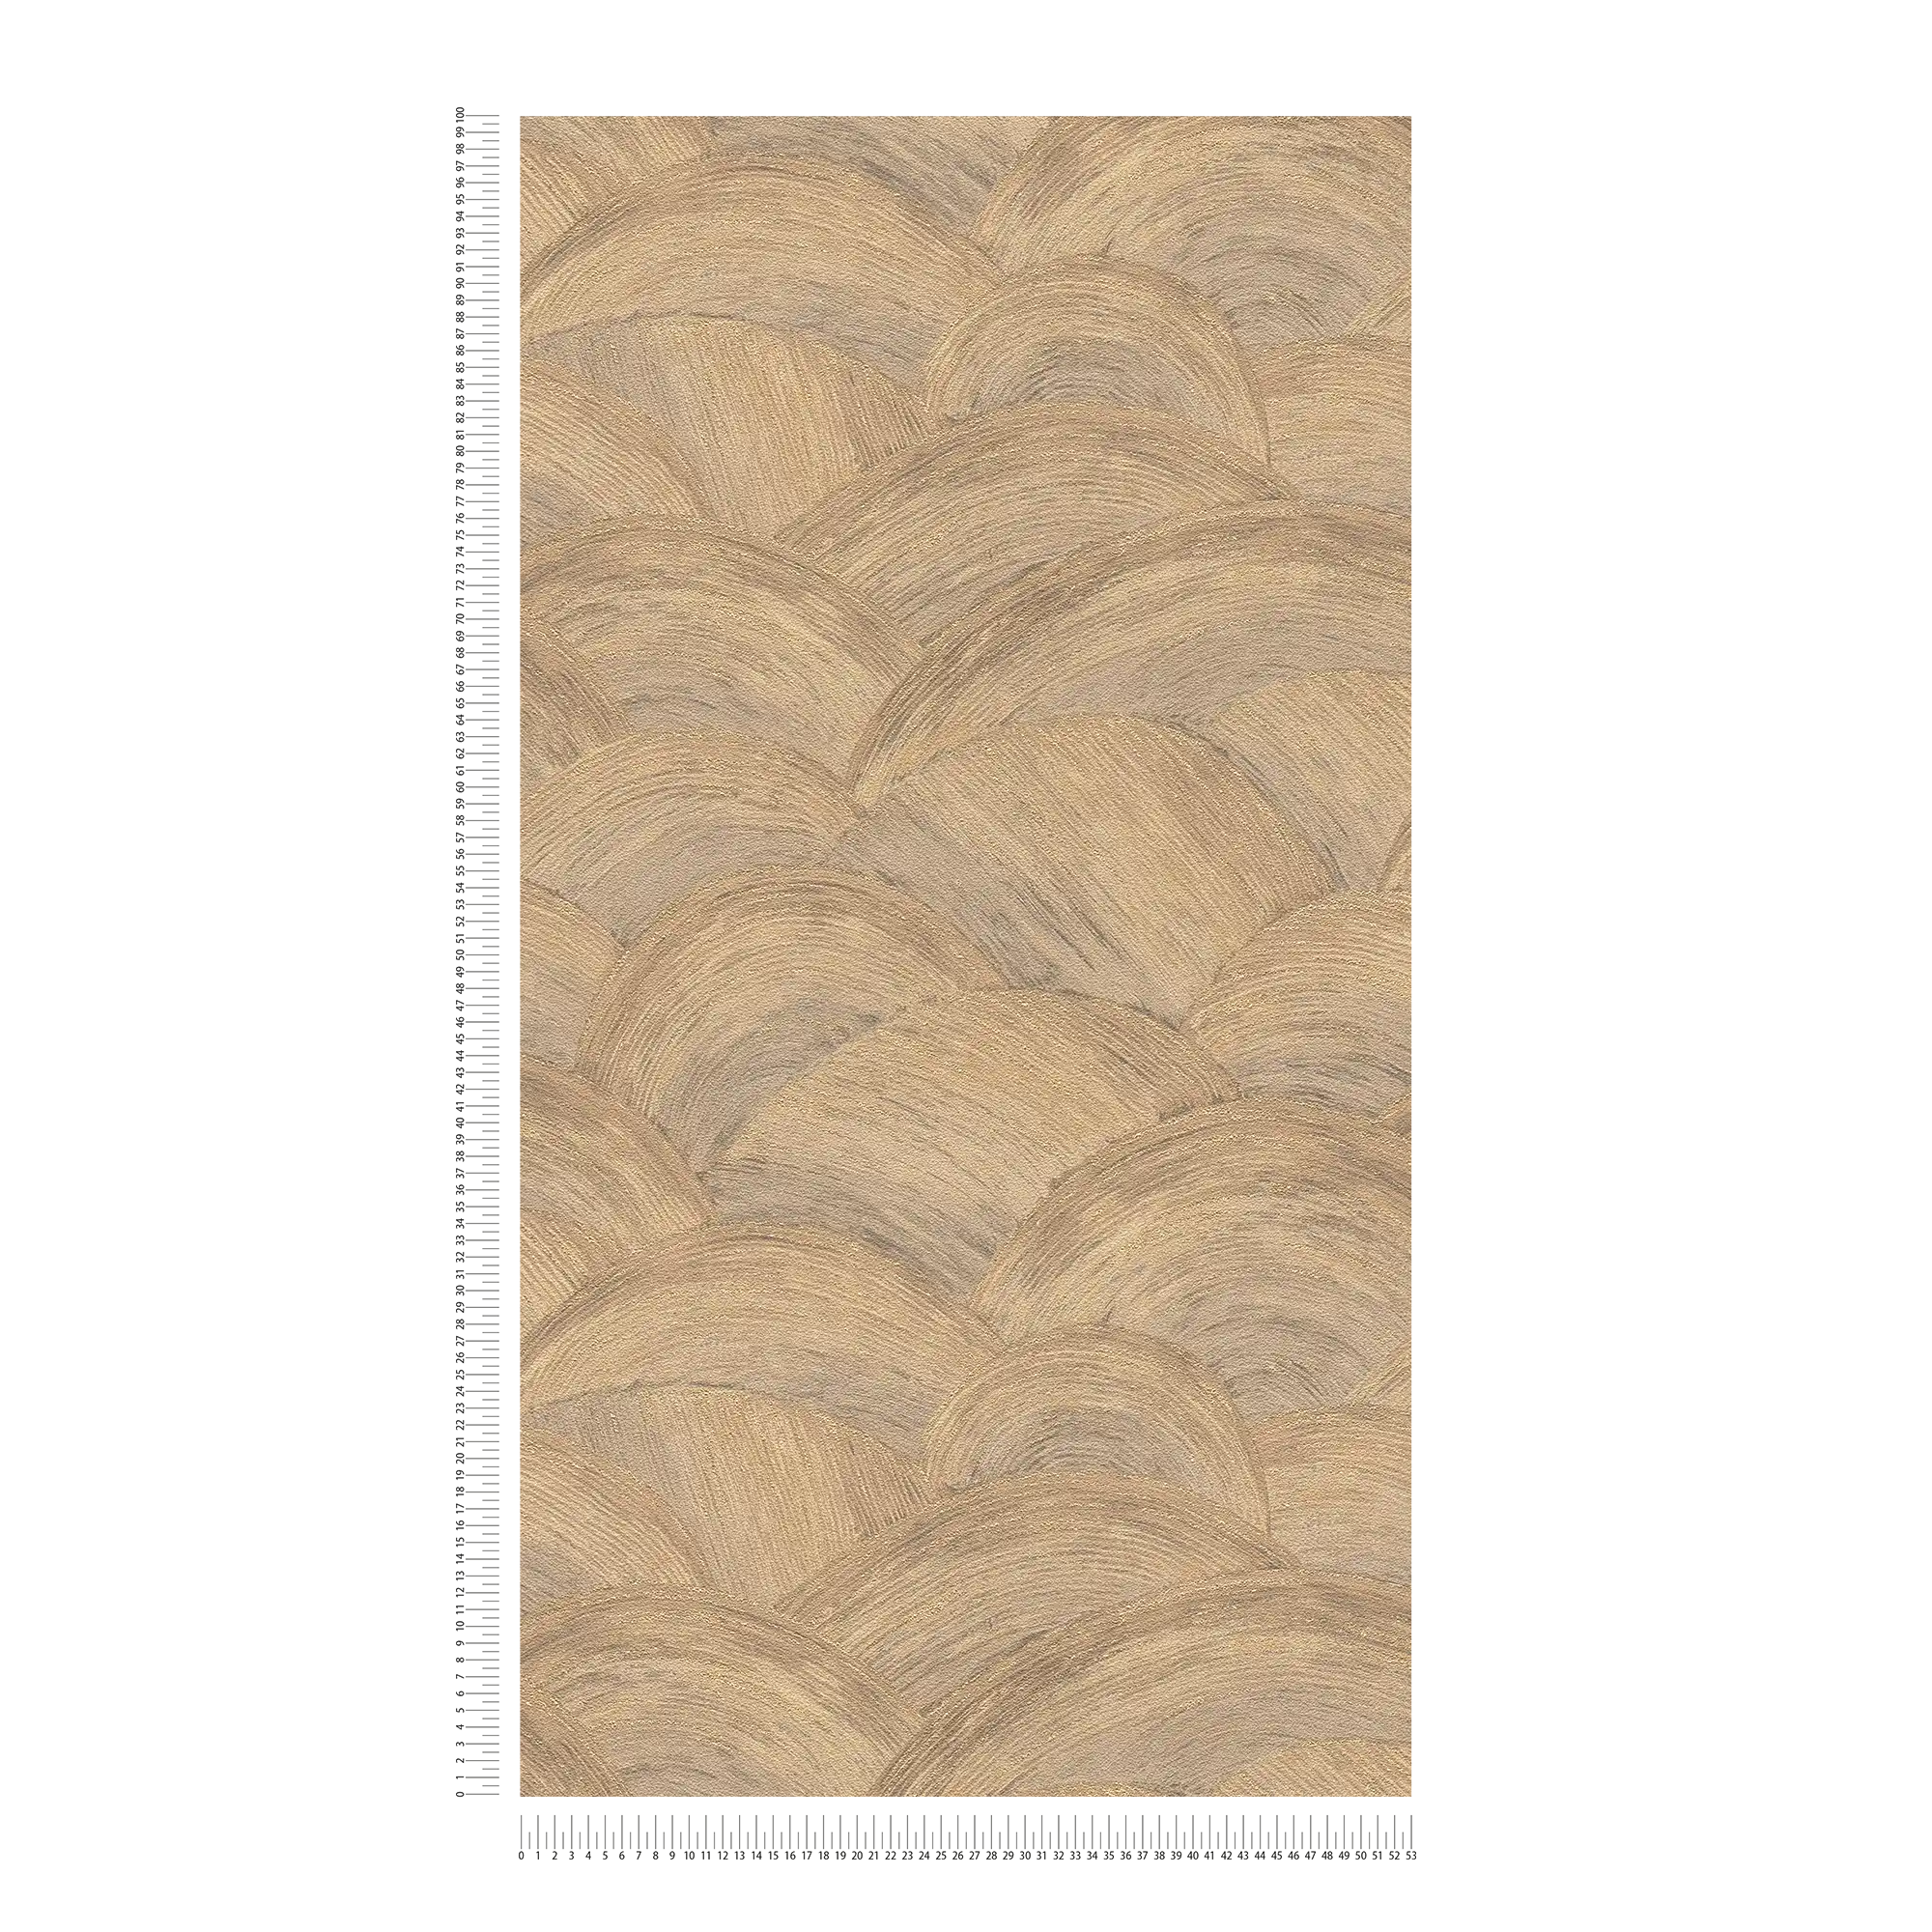             Non-woven wallpaper with shiny wave pattern - beige, brown, gold
        